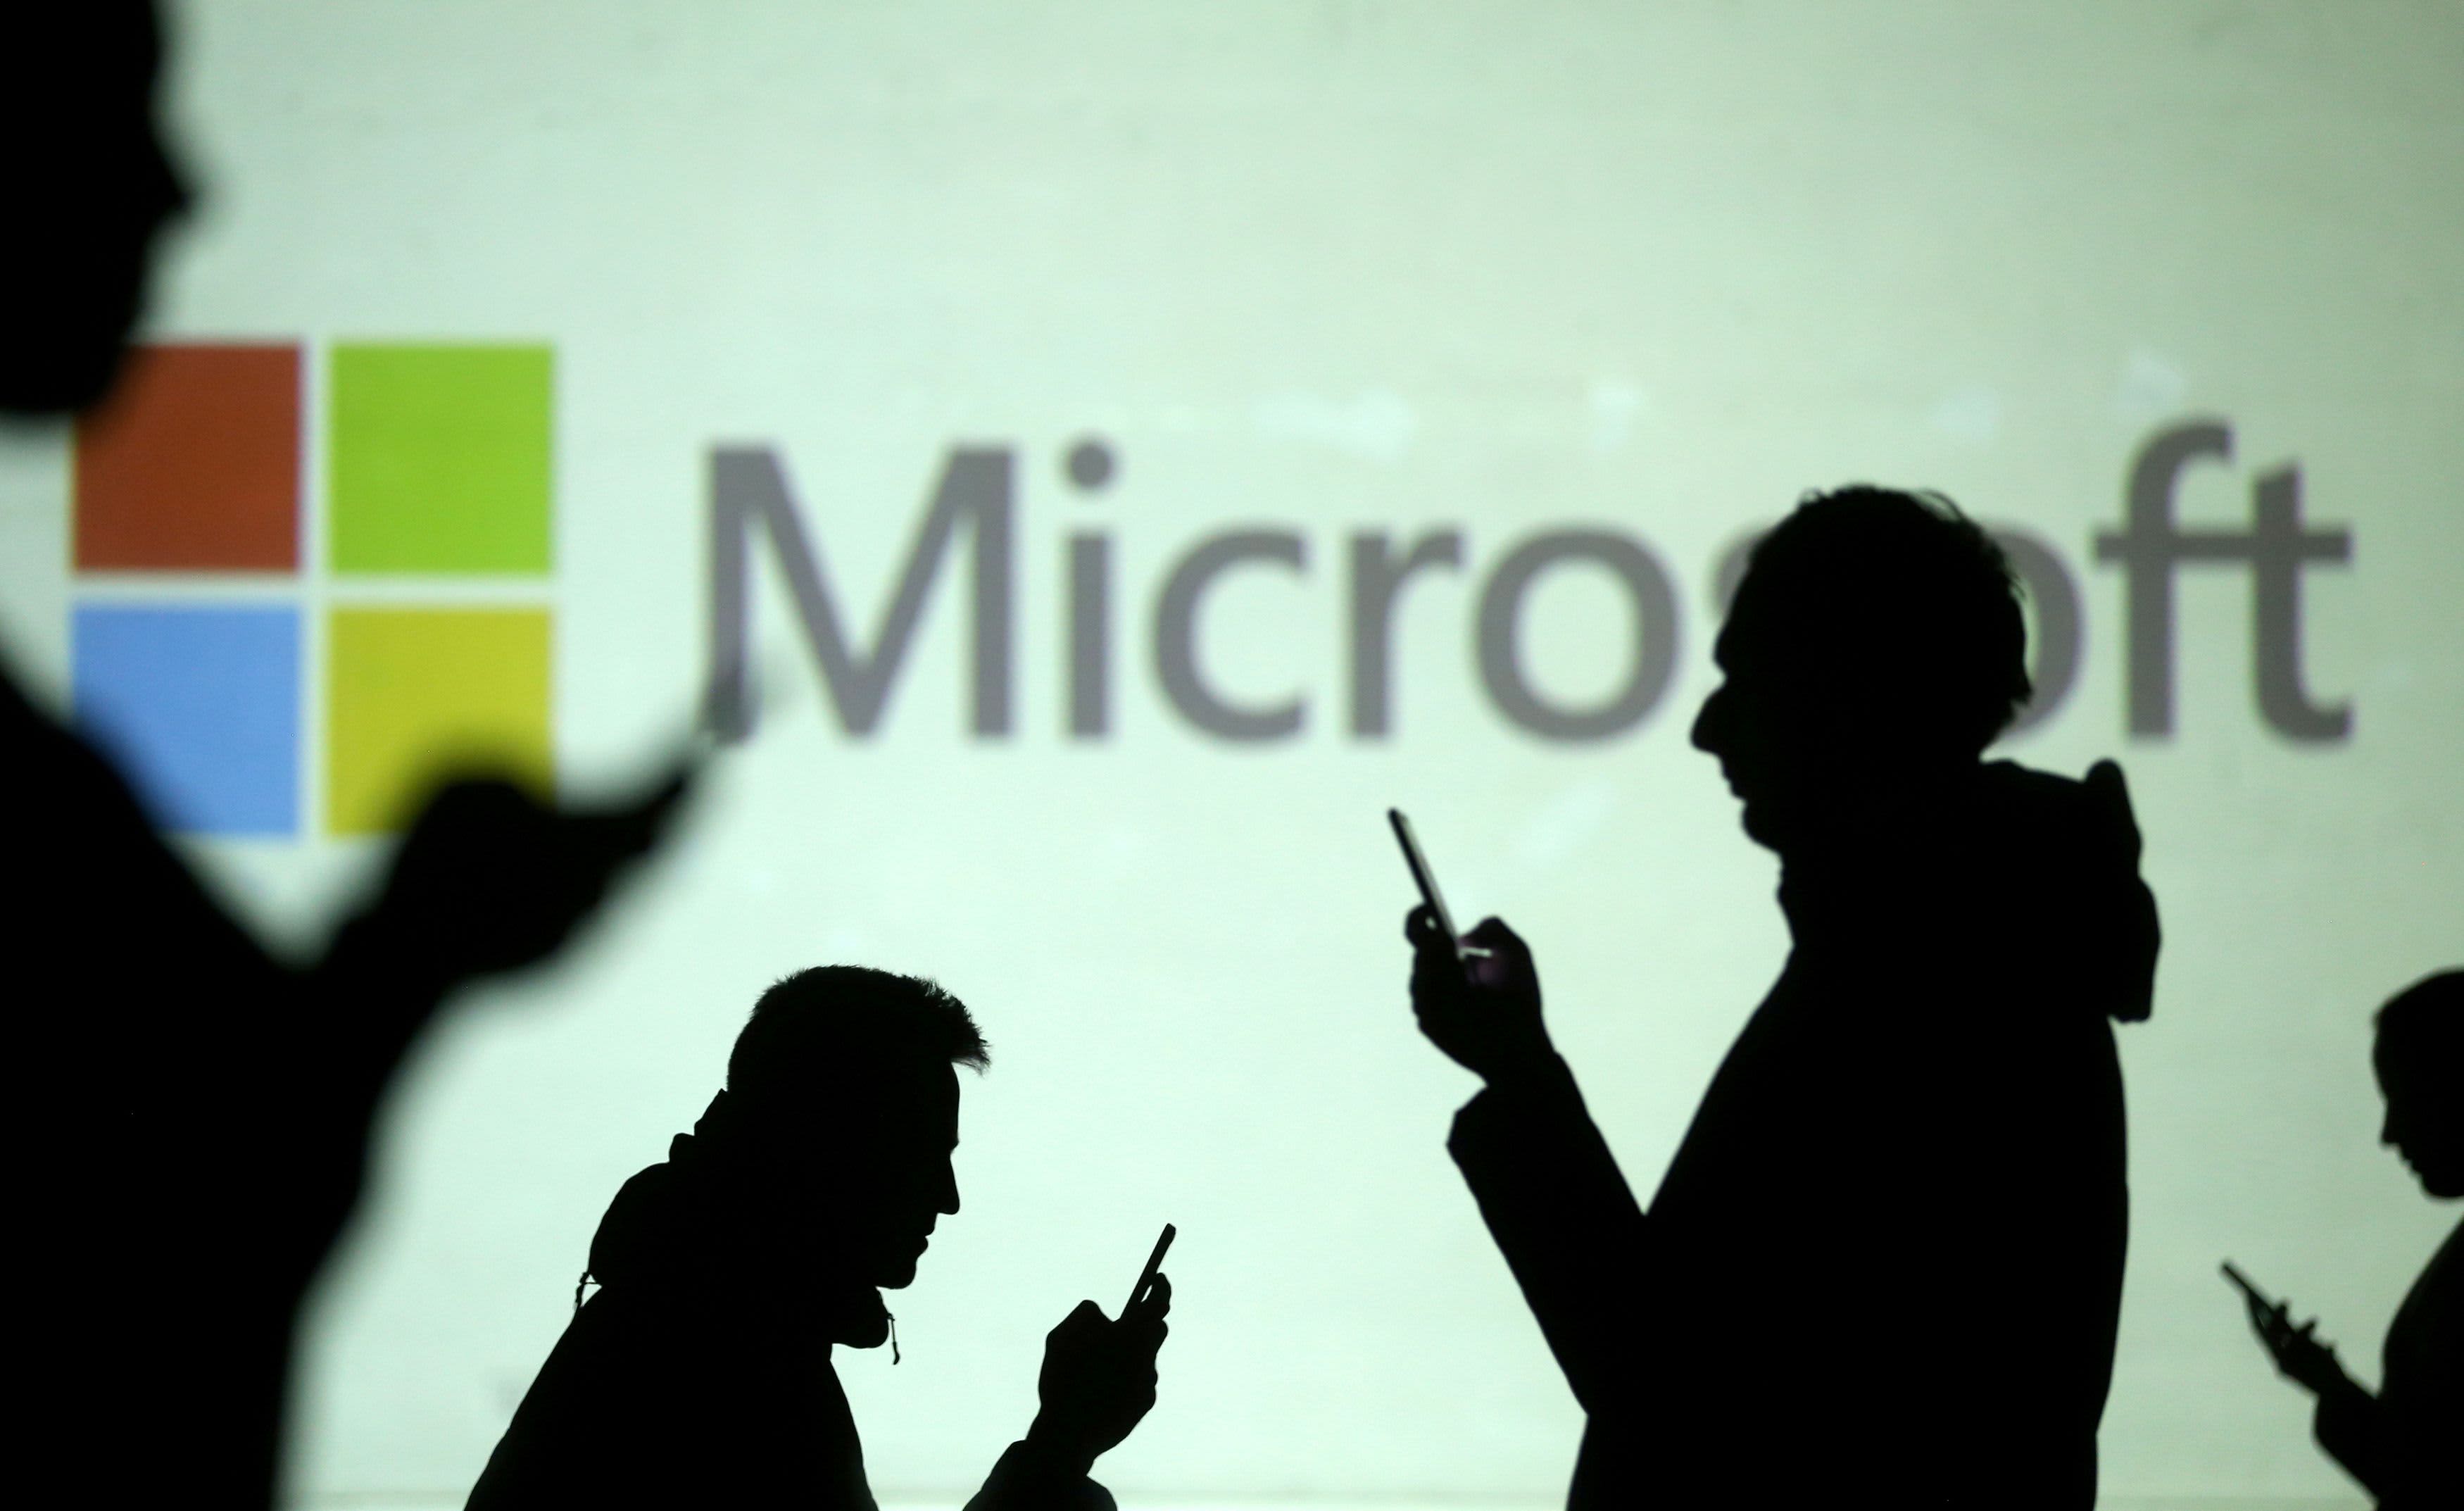 SolarWinds hackers accessed Microsoft’s source code, says company